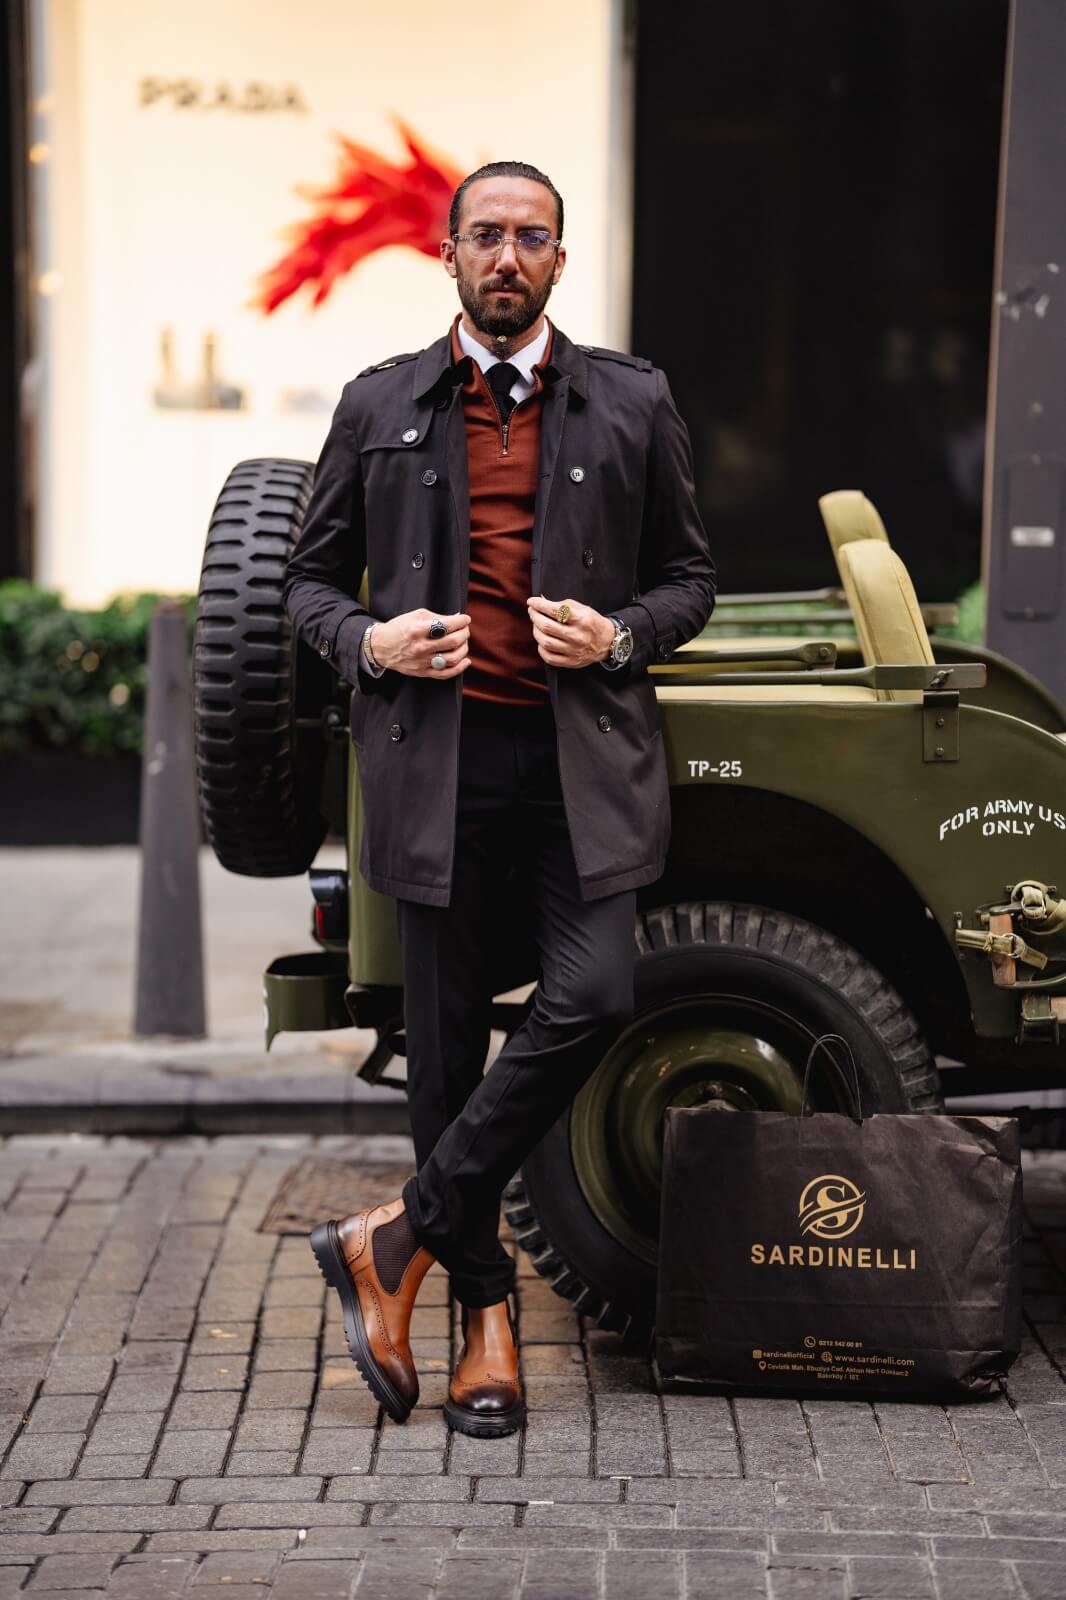 A Classic Black Trench Coat on display.